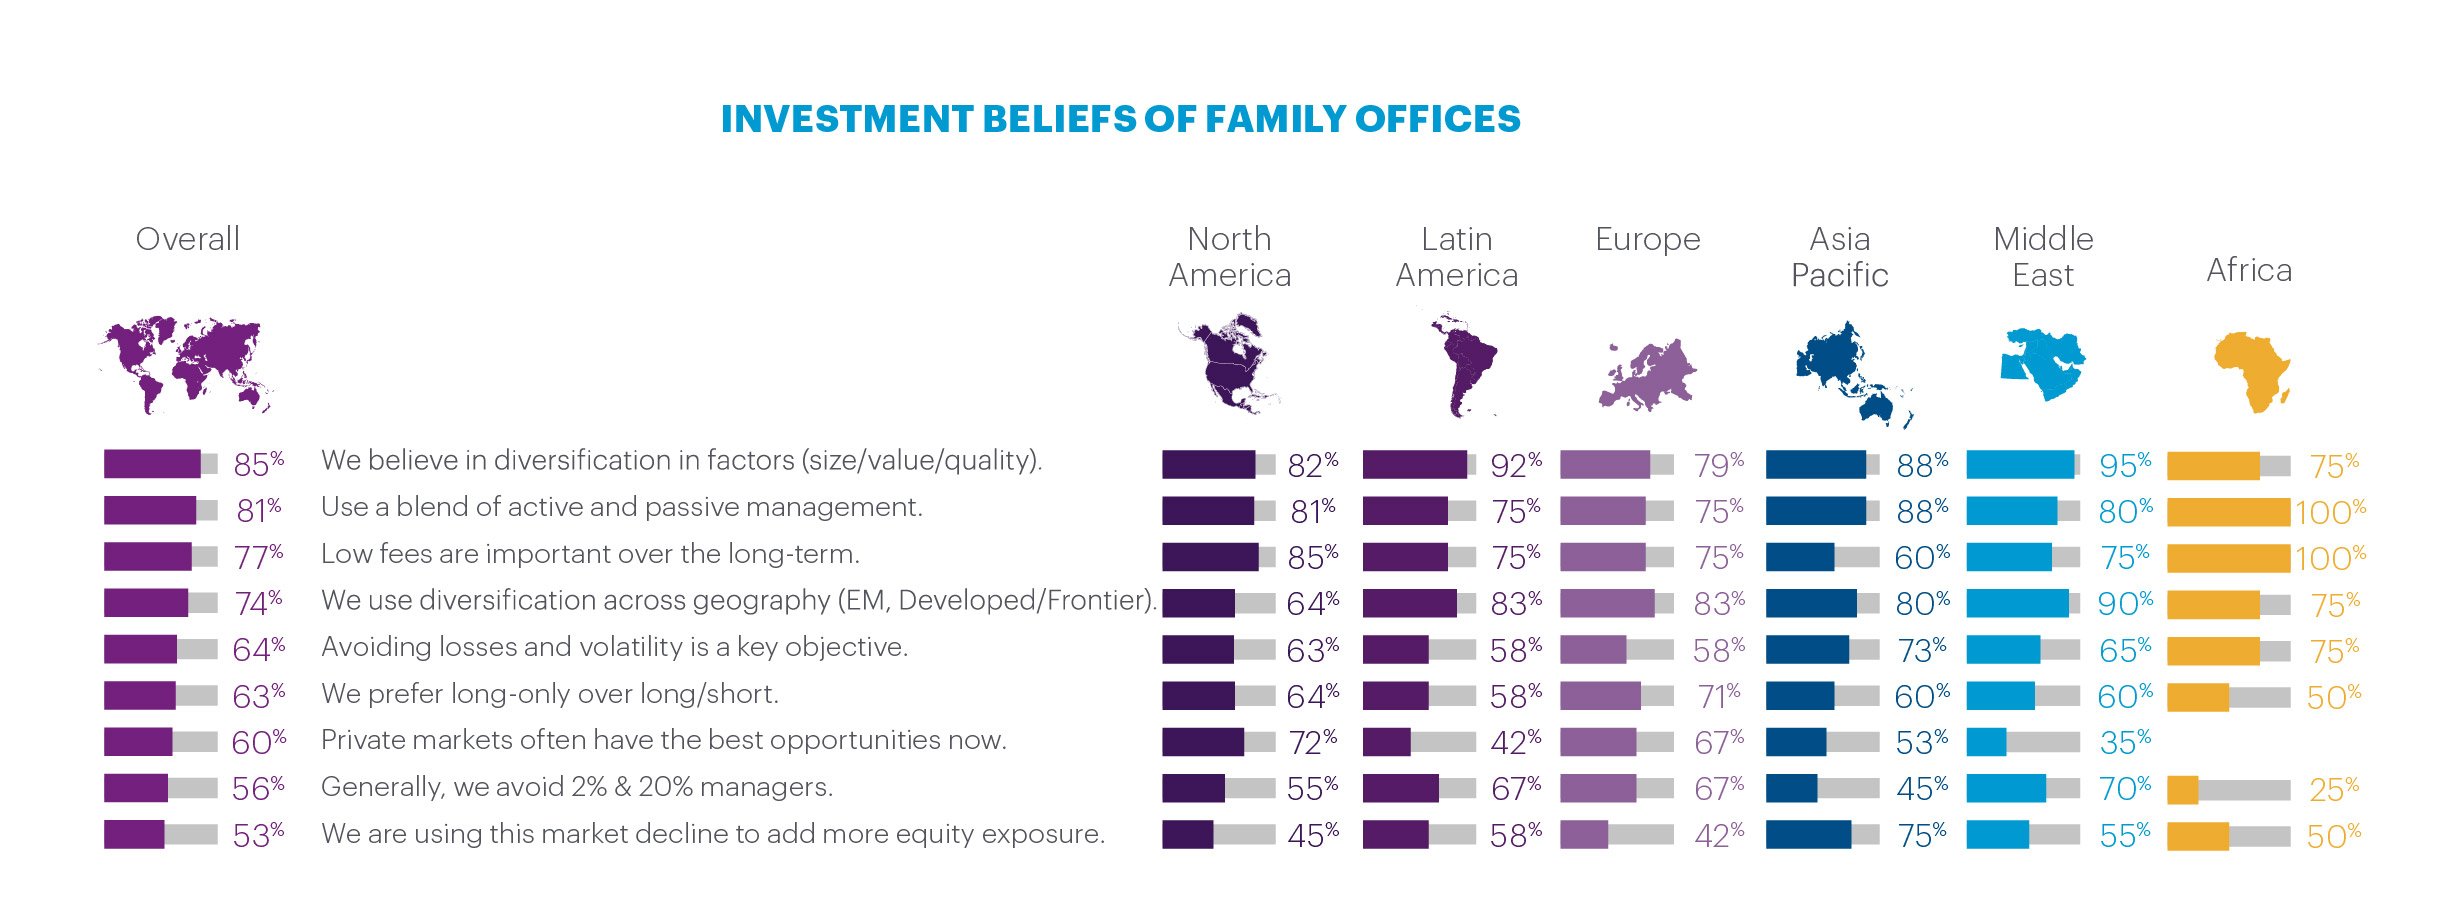 Regional percentages of family office investment beliefs